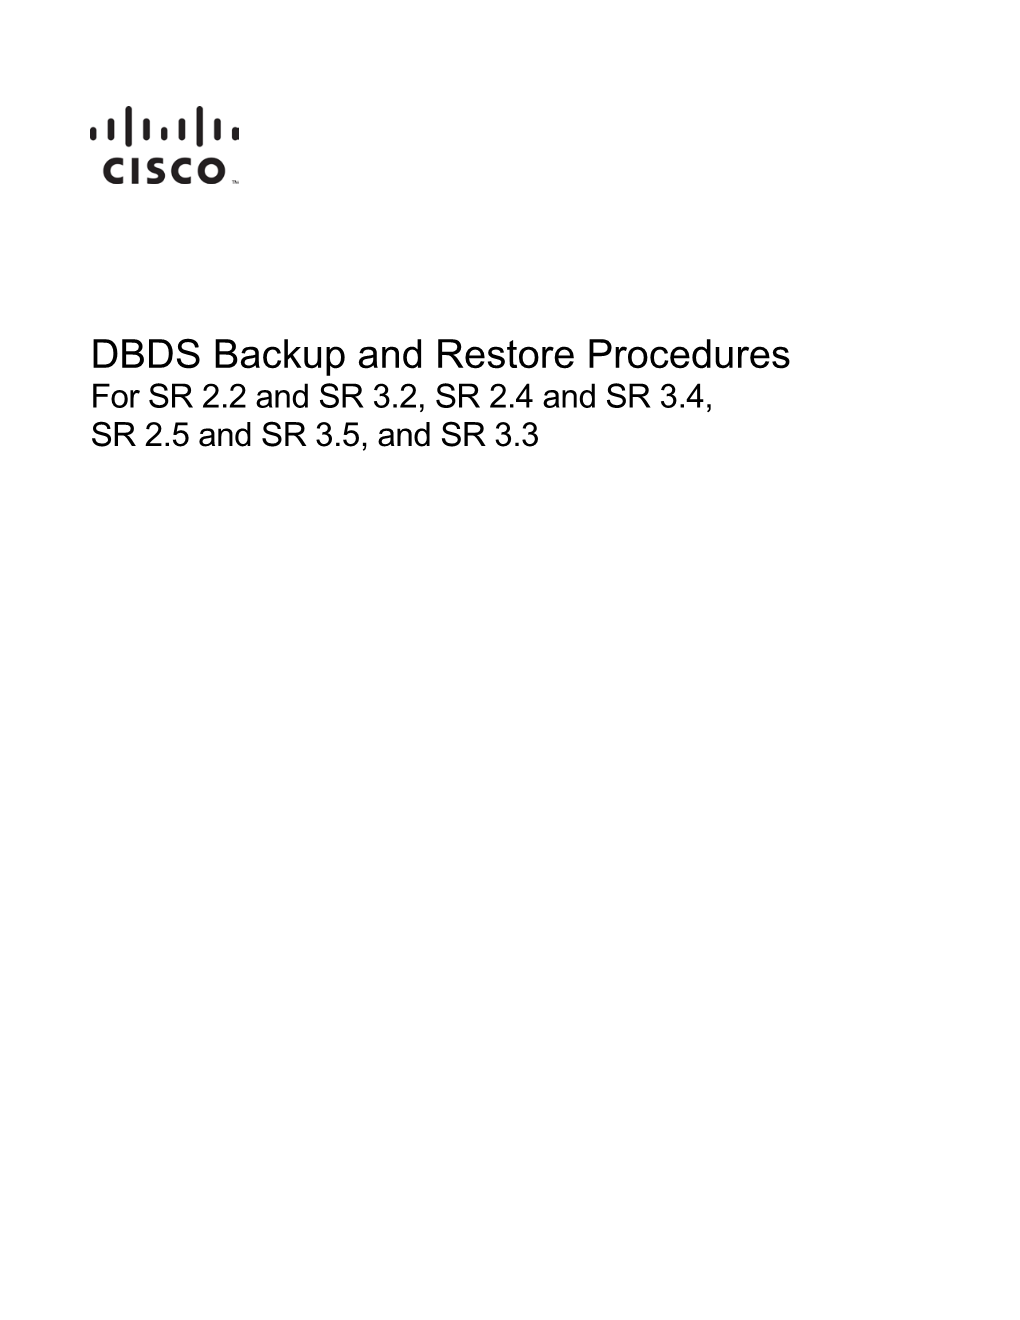 DBDS Backup and Restore Procedures for SR 2.2 and SR 3.2, SR 2.4 and SR 3.4, SR 2.5 and SR 3.5, and SR 3.3